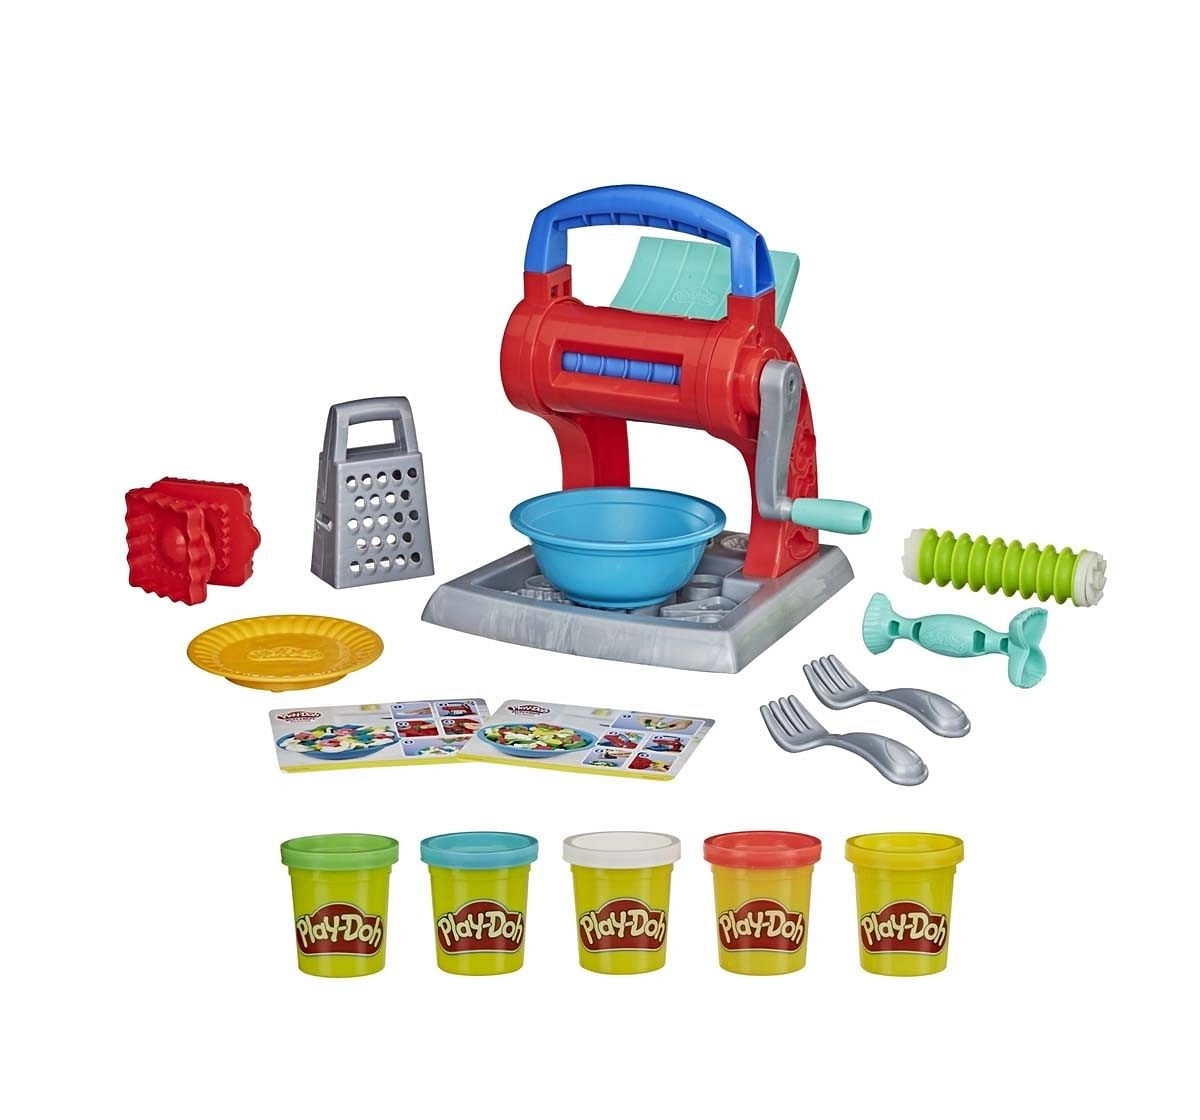 Play-Doh Kitchen Creations Noodle Party Playset for Kids 3 Years And Up With 5 Non-Toxic Play-Doh Colors Clay & Dough for Kids 